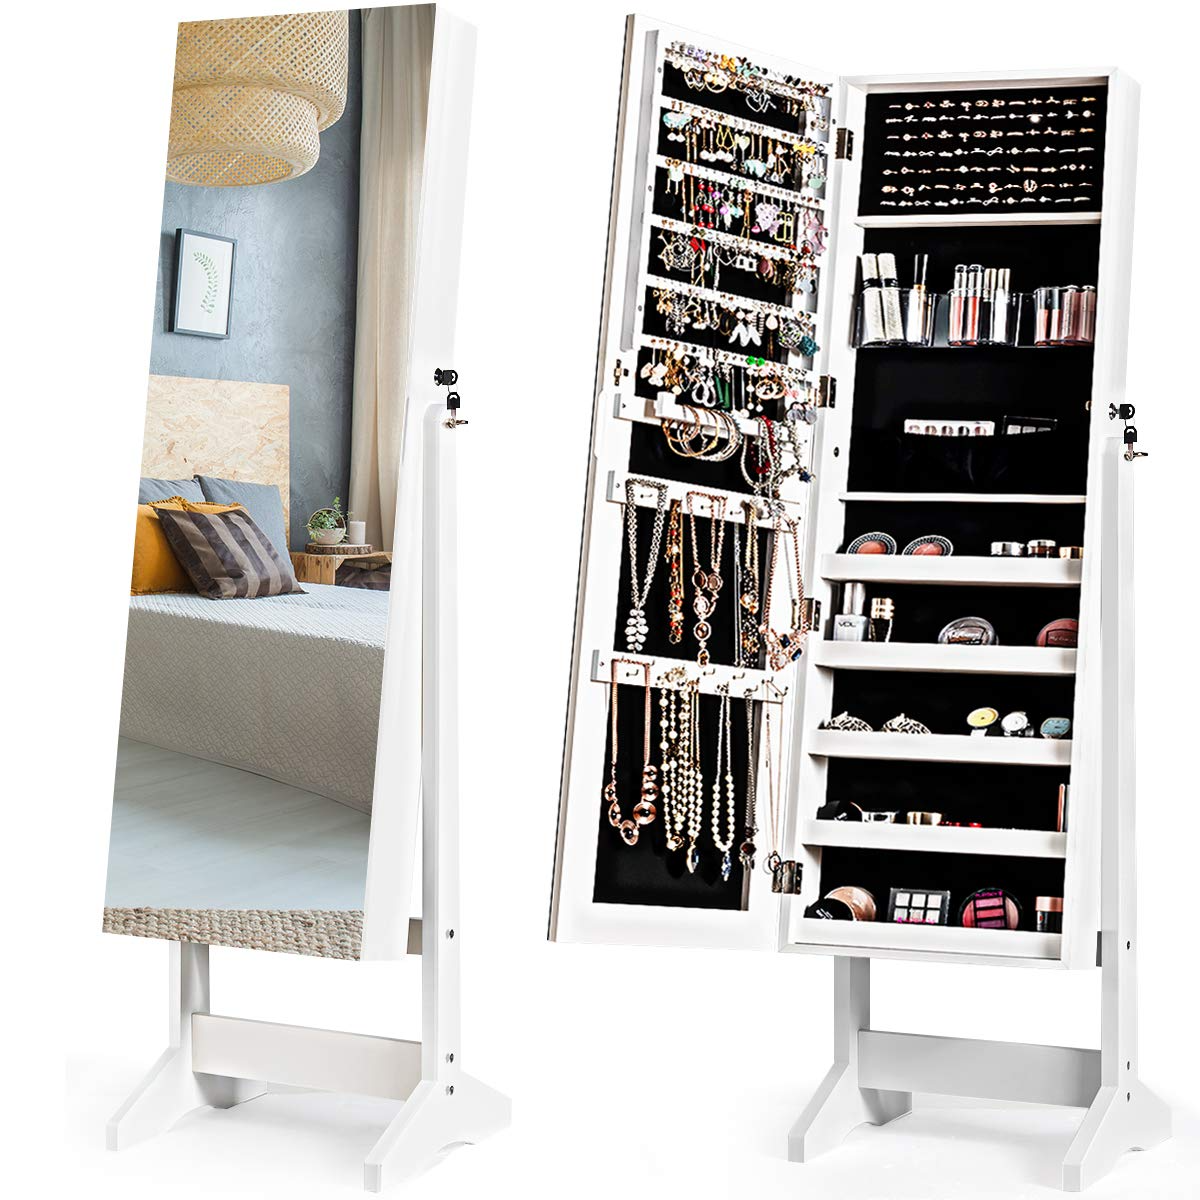 CHARMAID Jewelry Armoire Cabinet with Frameless Full Length Mirror